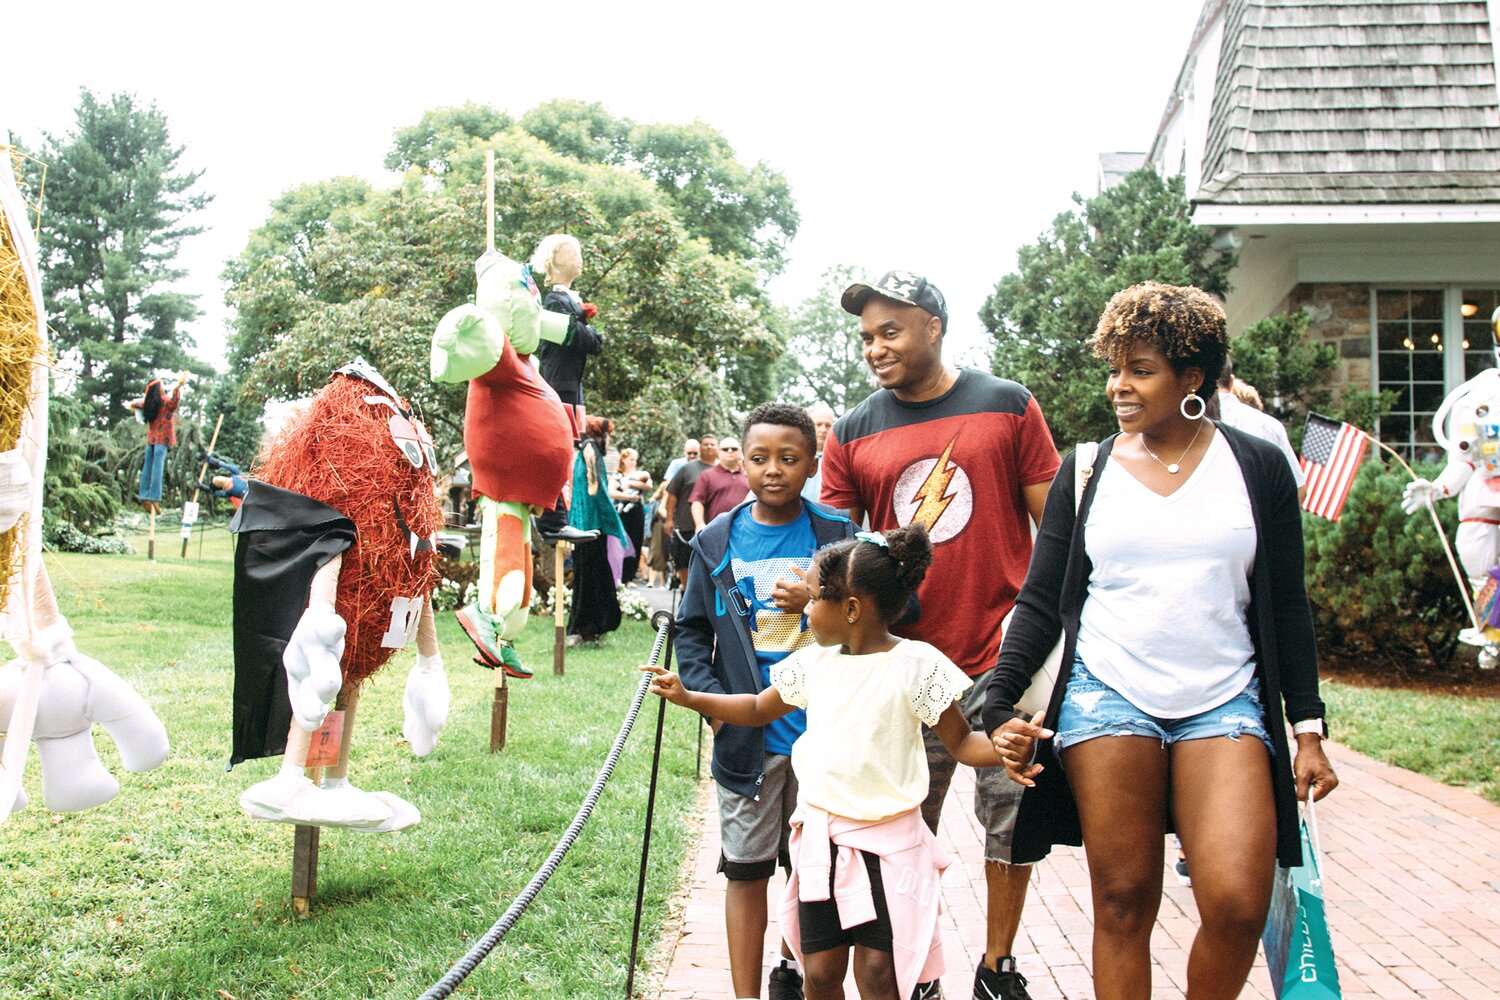 A family takes in the scarecrows at Peddler’s Village during a fall festival.